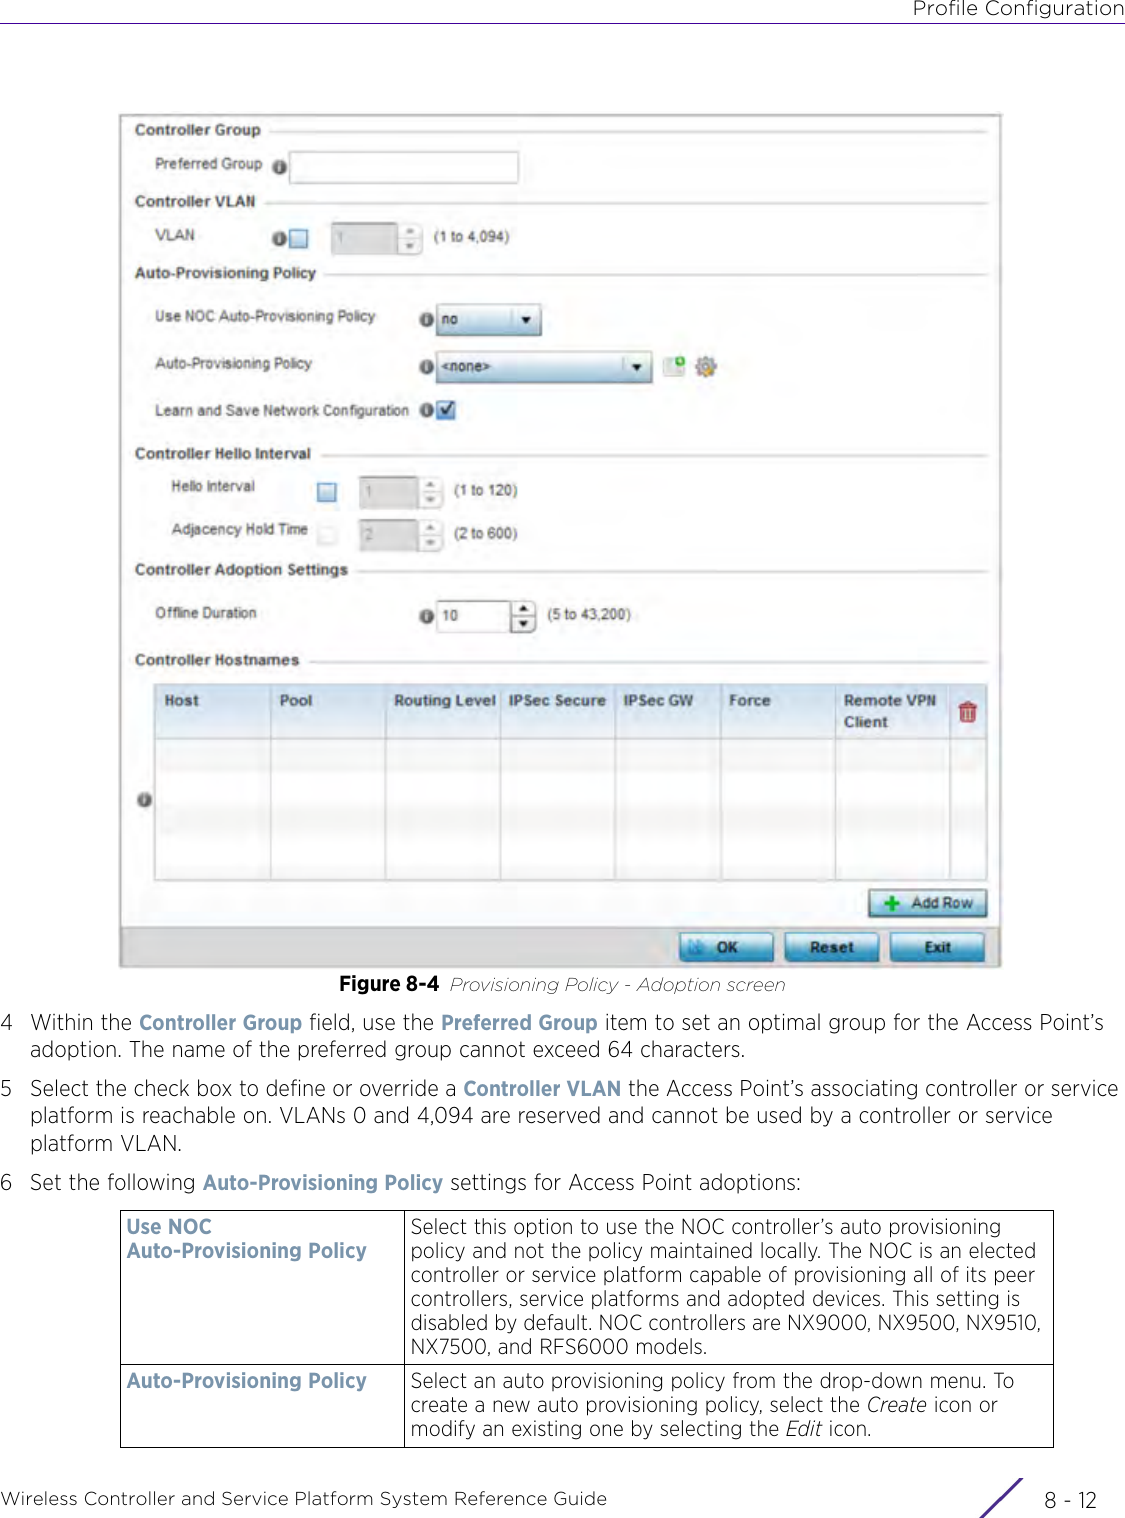 Profile ConfigurationWireless Controller and Service Platform System Reference Guide  8 - 12Figure 8-4 Provisioning Policy - Adoption screen4Within the Controller Group field, use the Preferred Group item to set an optimal group for the Access Point’s adoption. The name of the preferred group cannot exceed 64 characters.5 Select the check box to define or override a Controller VLAN the Access Point’s associating controller or service platform is reachable on. VLANs 0 and 4,094 are reserved and cannot be used by a controller or service platform VLAN.6 Set the following Auto-Provisioning Policy settings for Access Point adoptions:Use NOC Auto-Provisioning PolicySelect this option to use the NOC controller’s auto provisioning policy and not the policy maintained locally. The NOC is an elected controller or service platform capable of provisioning all of its peer controllers, service platforms and adopted devices. This setting is disabled by default. NOC controllers are NX9000, NX9500, NX9510, NX7500, and RFS6000 models.Auto-Provisioning Policy Select an auto provisioning policy from the drop-down menu. To create a new auto provisioning policy, select the Create icon or modify an existing one by selecting the Edit icon.